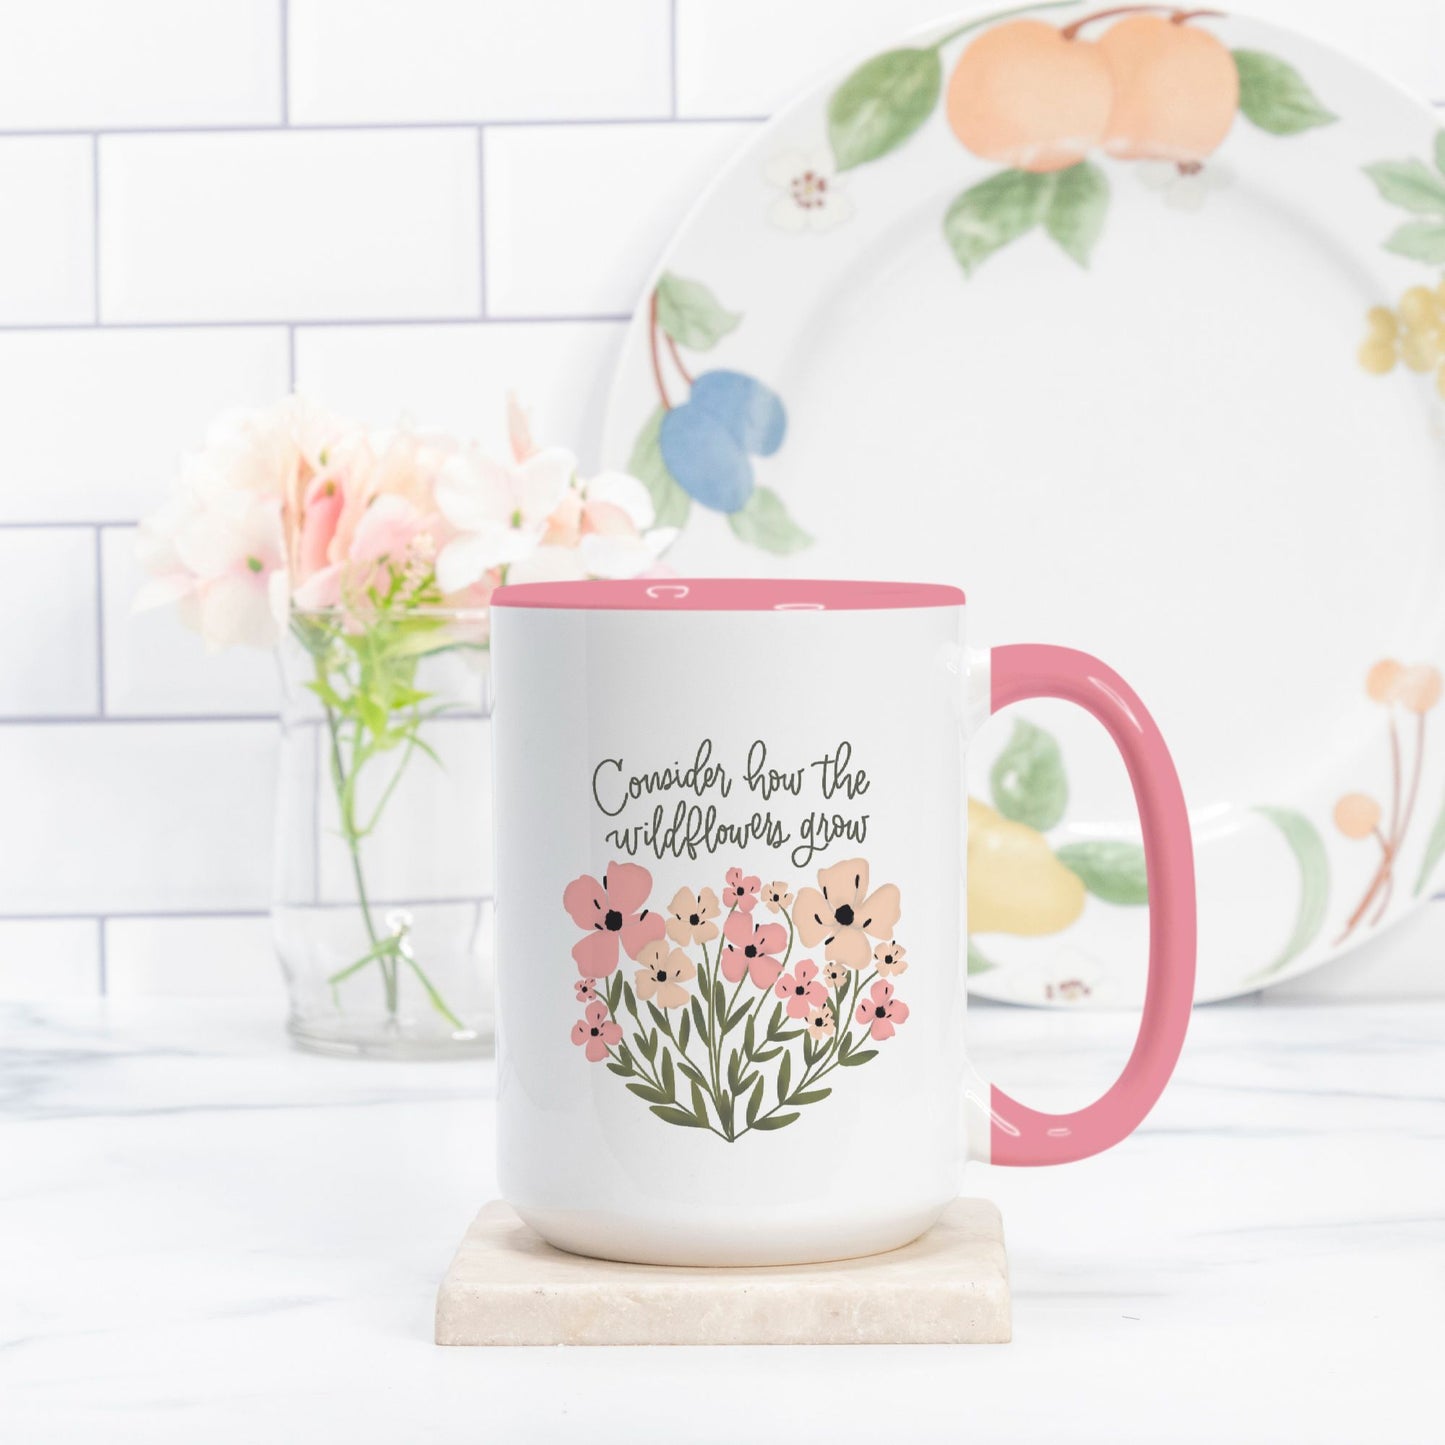 Consider How The Wildflowers Grow Mug Deluxe 15oz. (Pink + White)